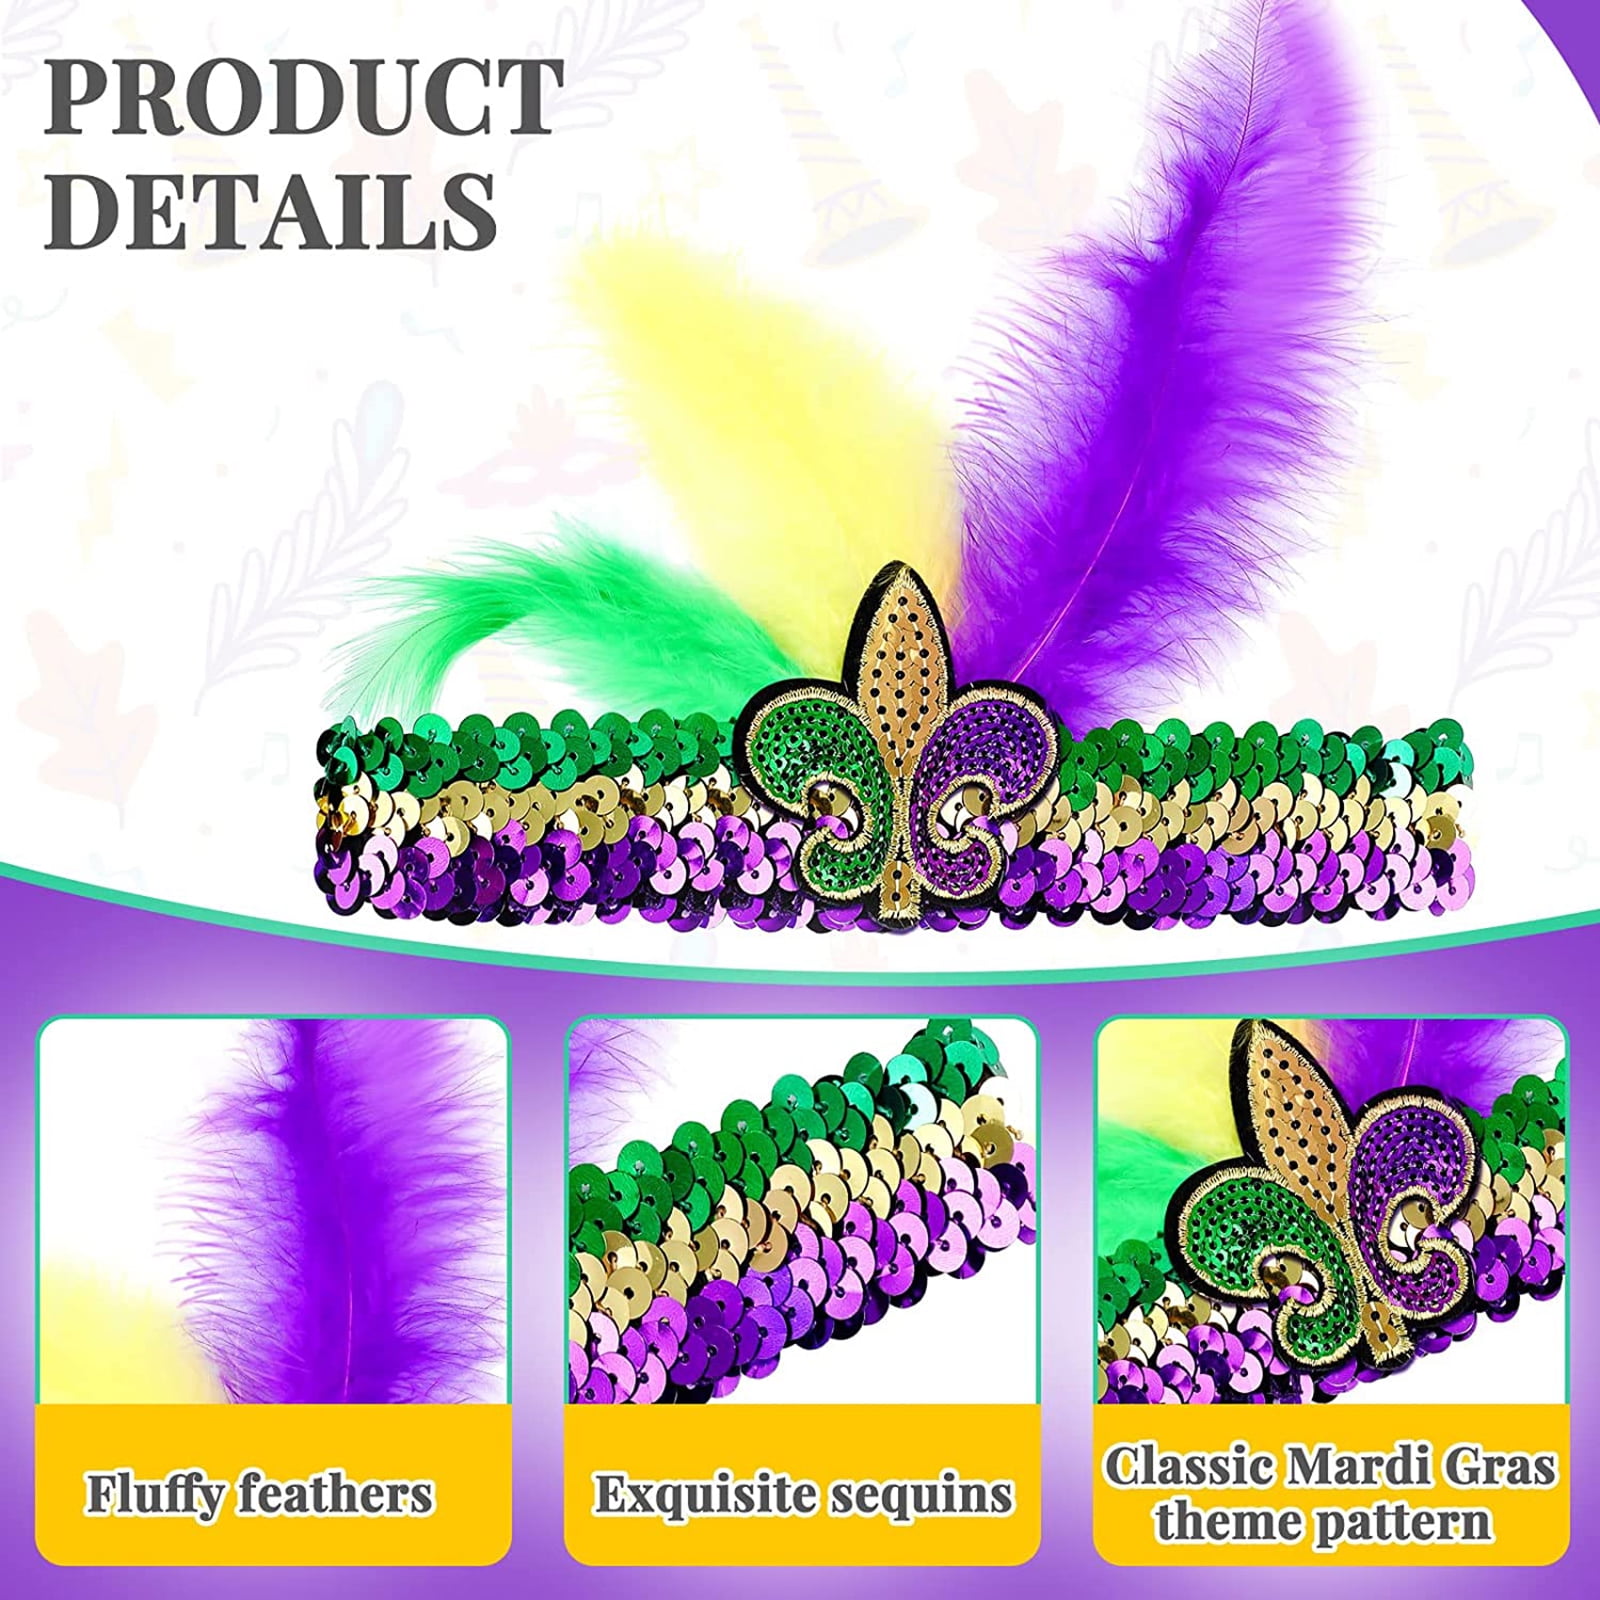 Mardi Gras Feathers Beads Carnival Fabric by Quilting Treasures - modeS4u